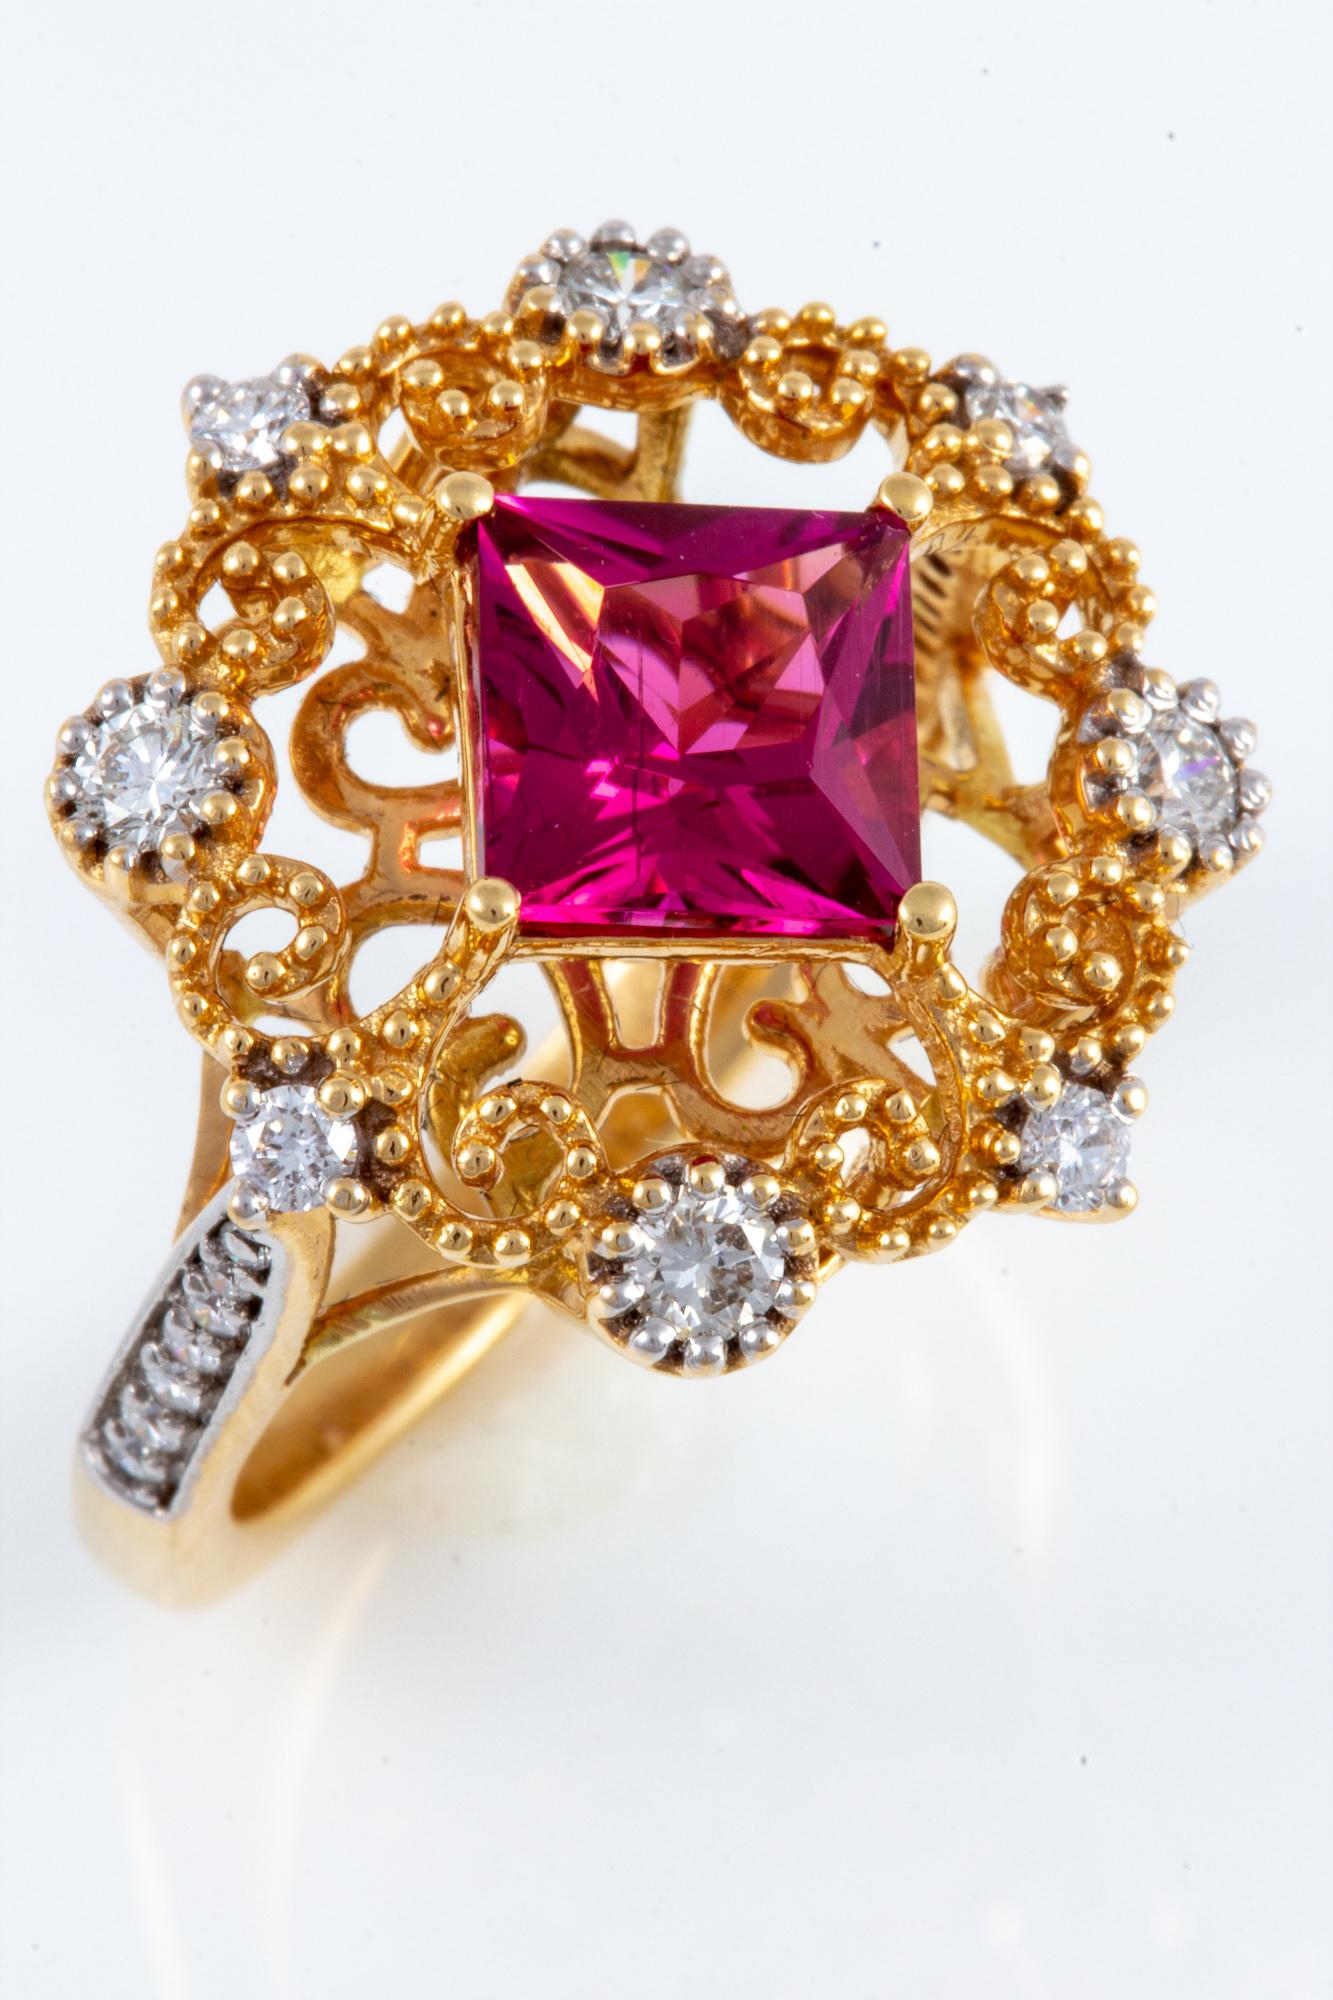 Rubellite Tourmaline and Diamond Ring set in 18 kt Gold For Sale 3